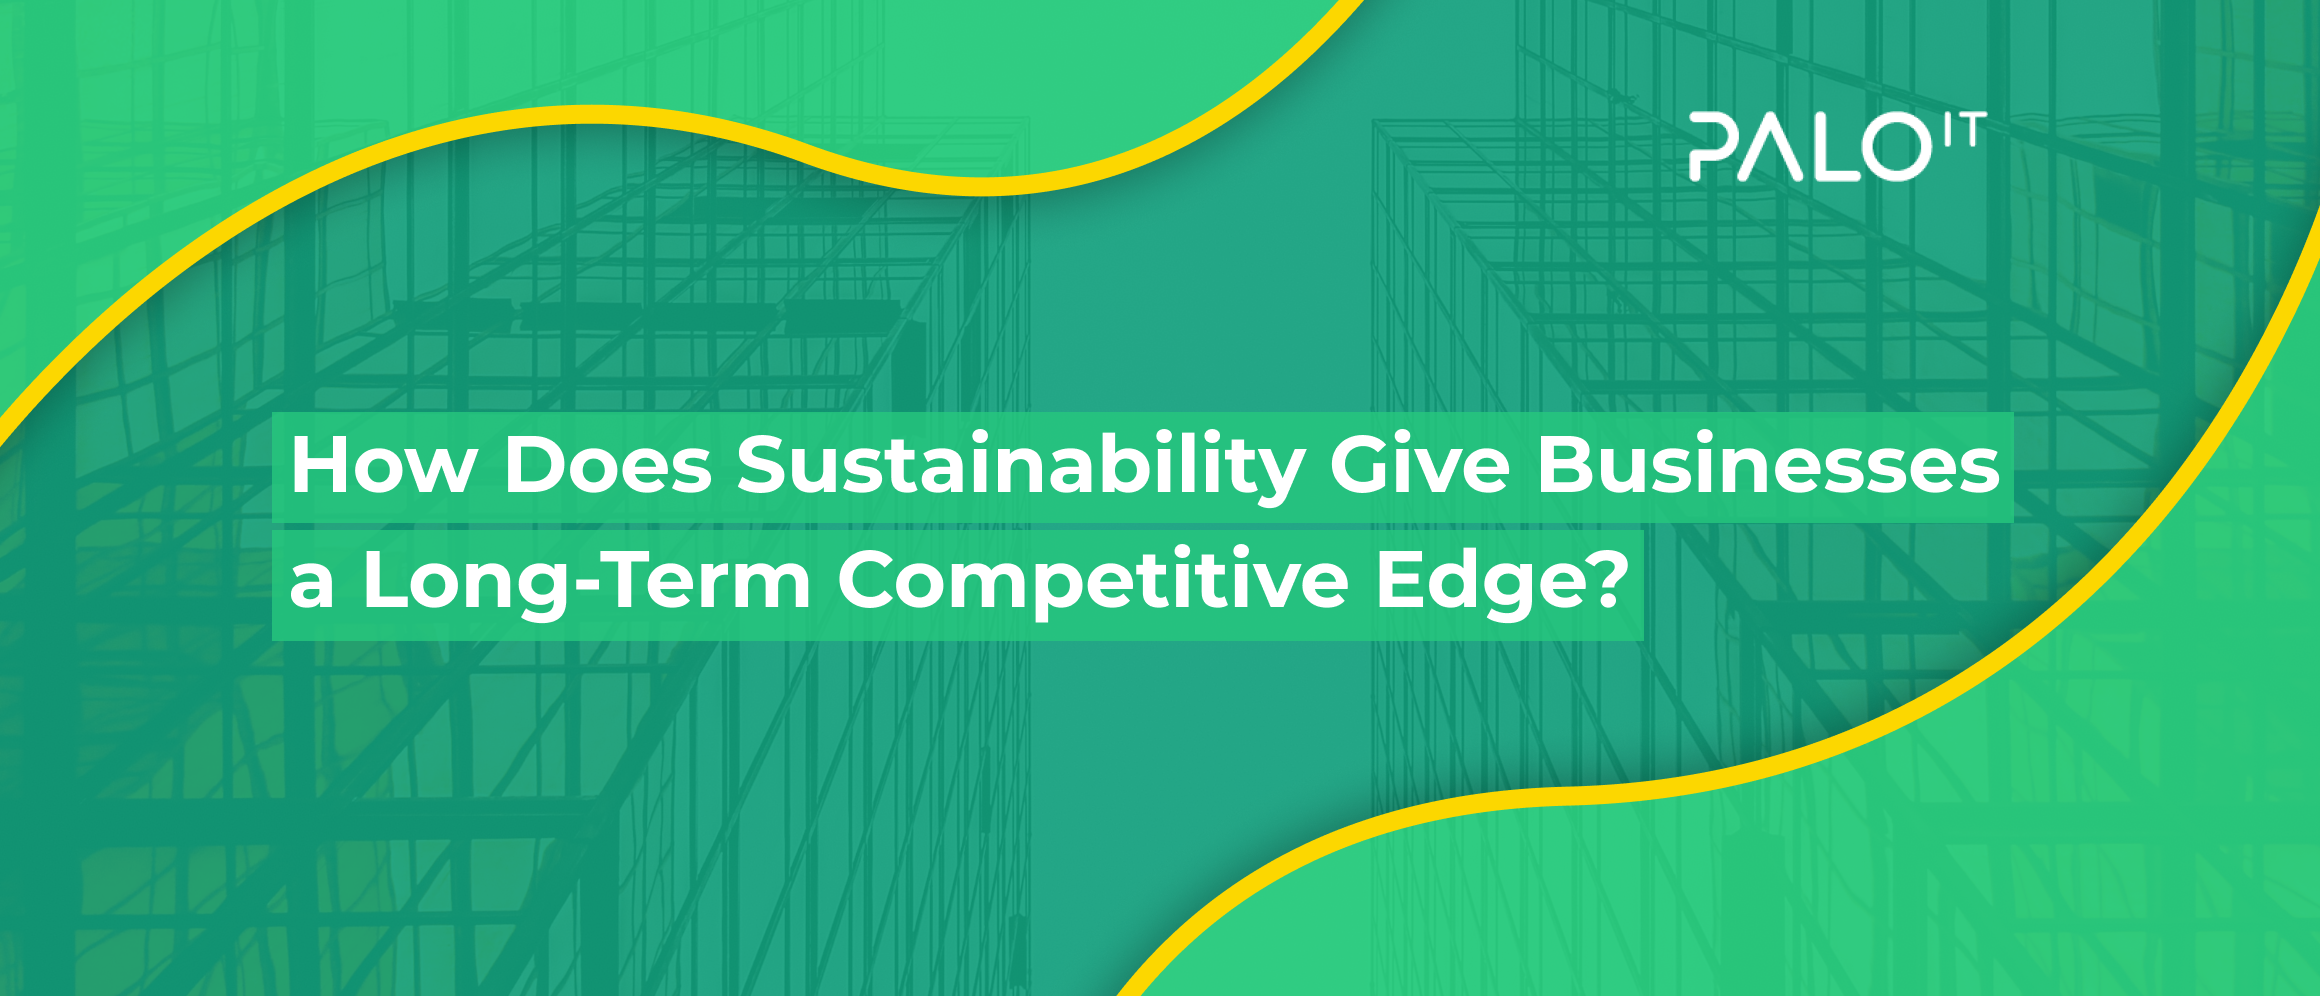 How Does Sustainability Give Businesses a Long-Term Competitive Edge?